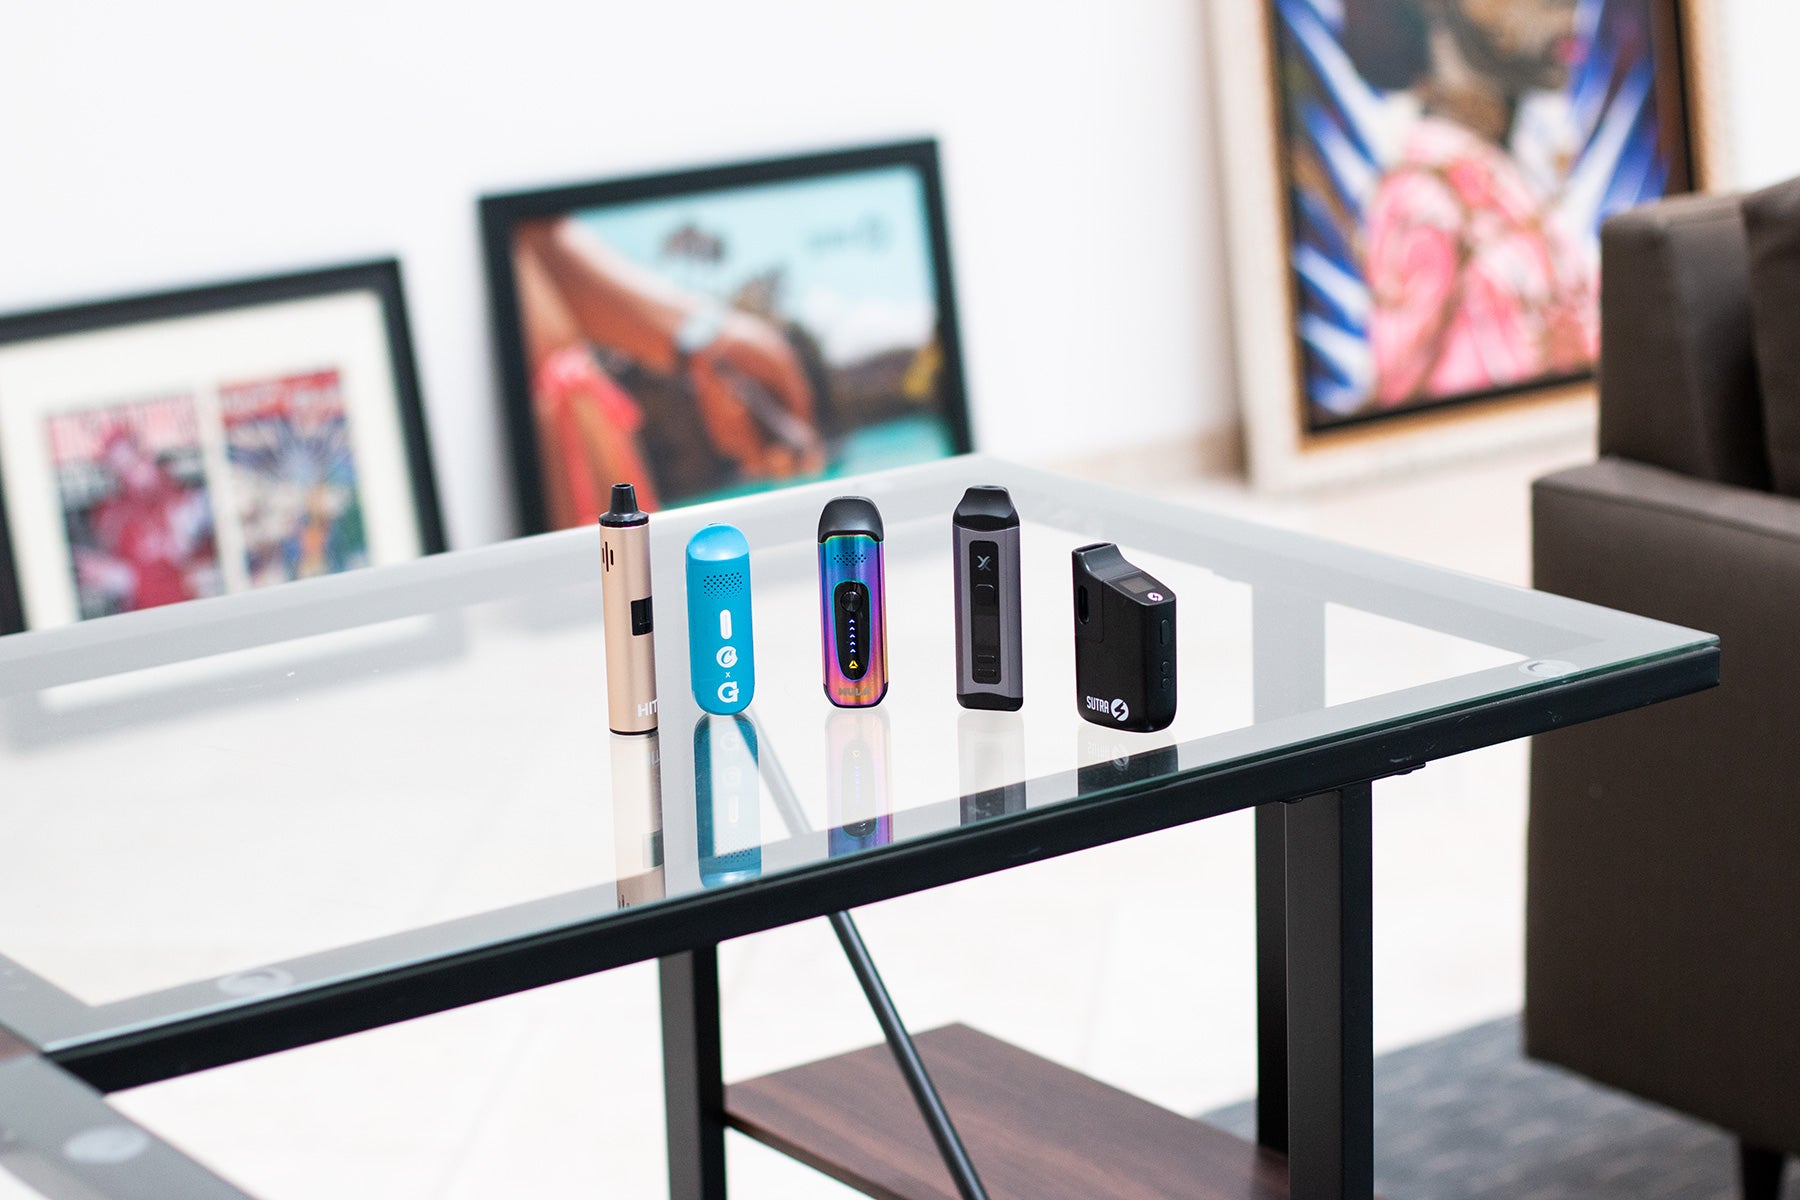 Wholesale Dry Herb Vaporizers Standing on glass table in office lobby